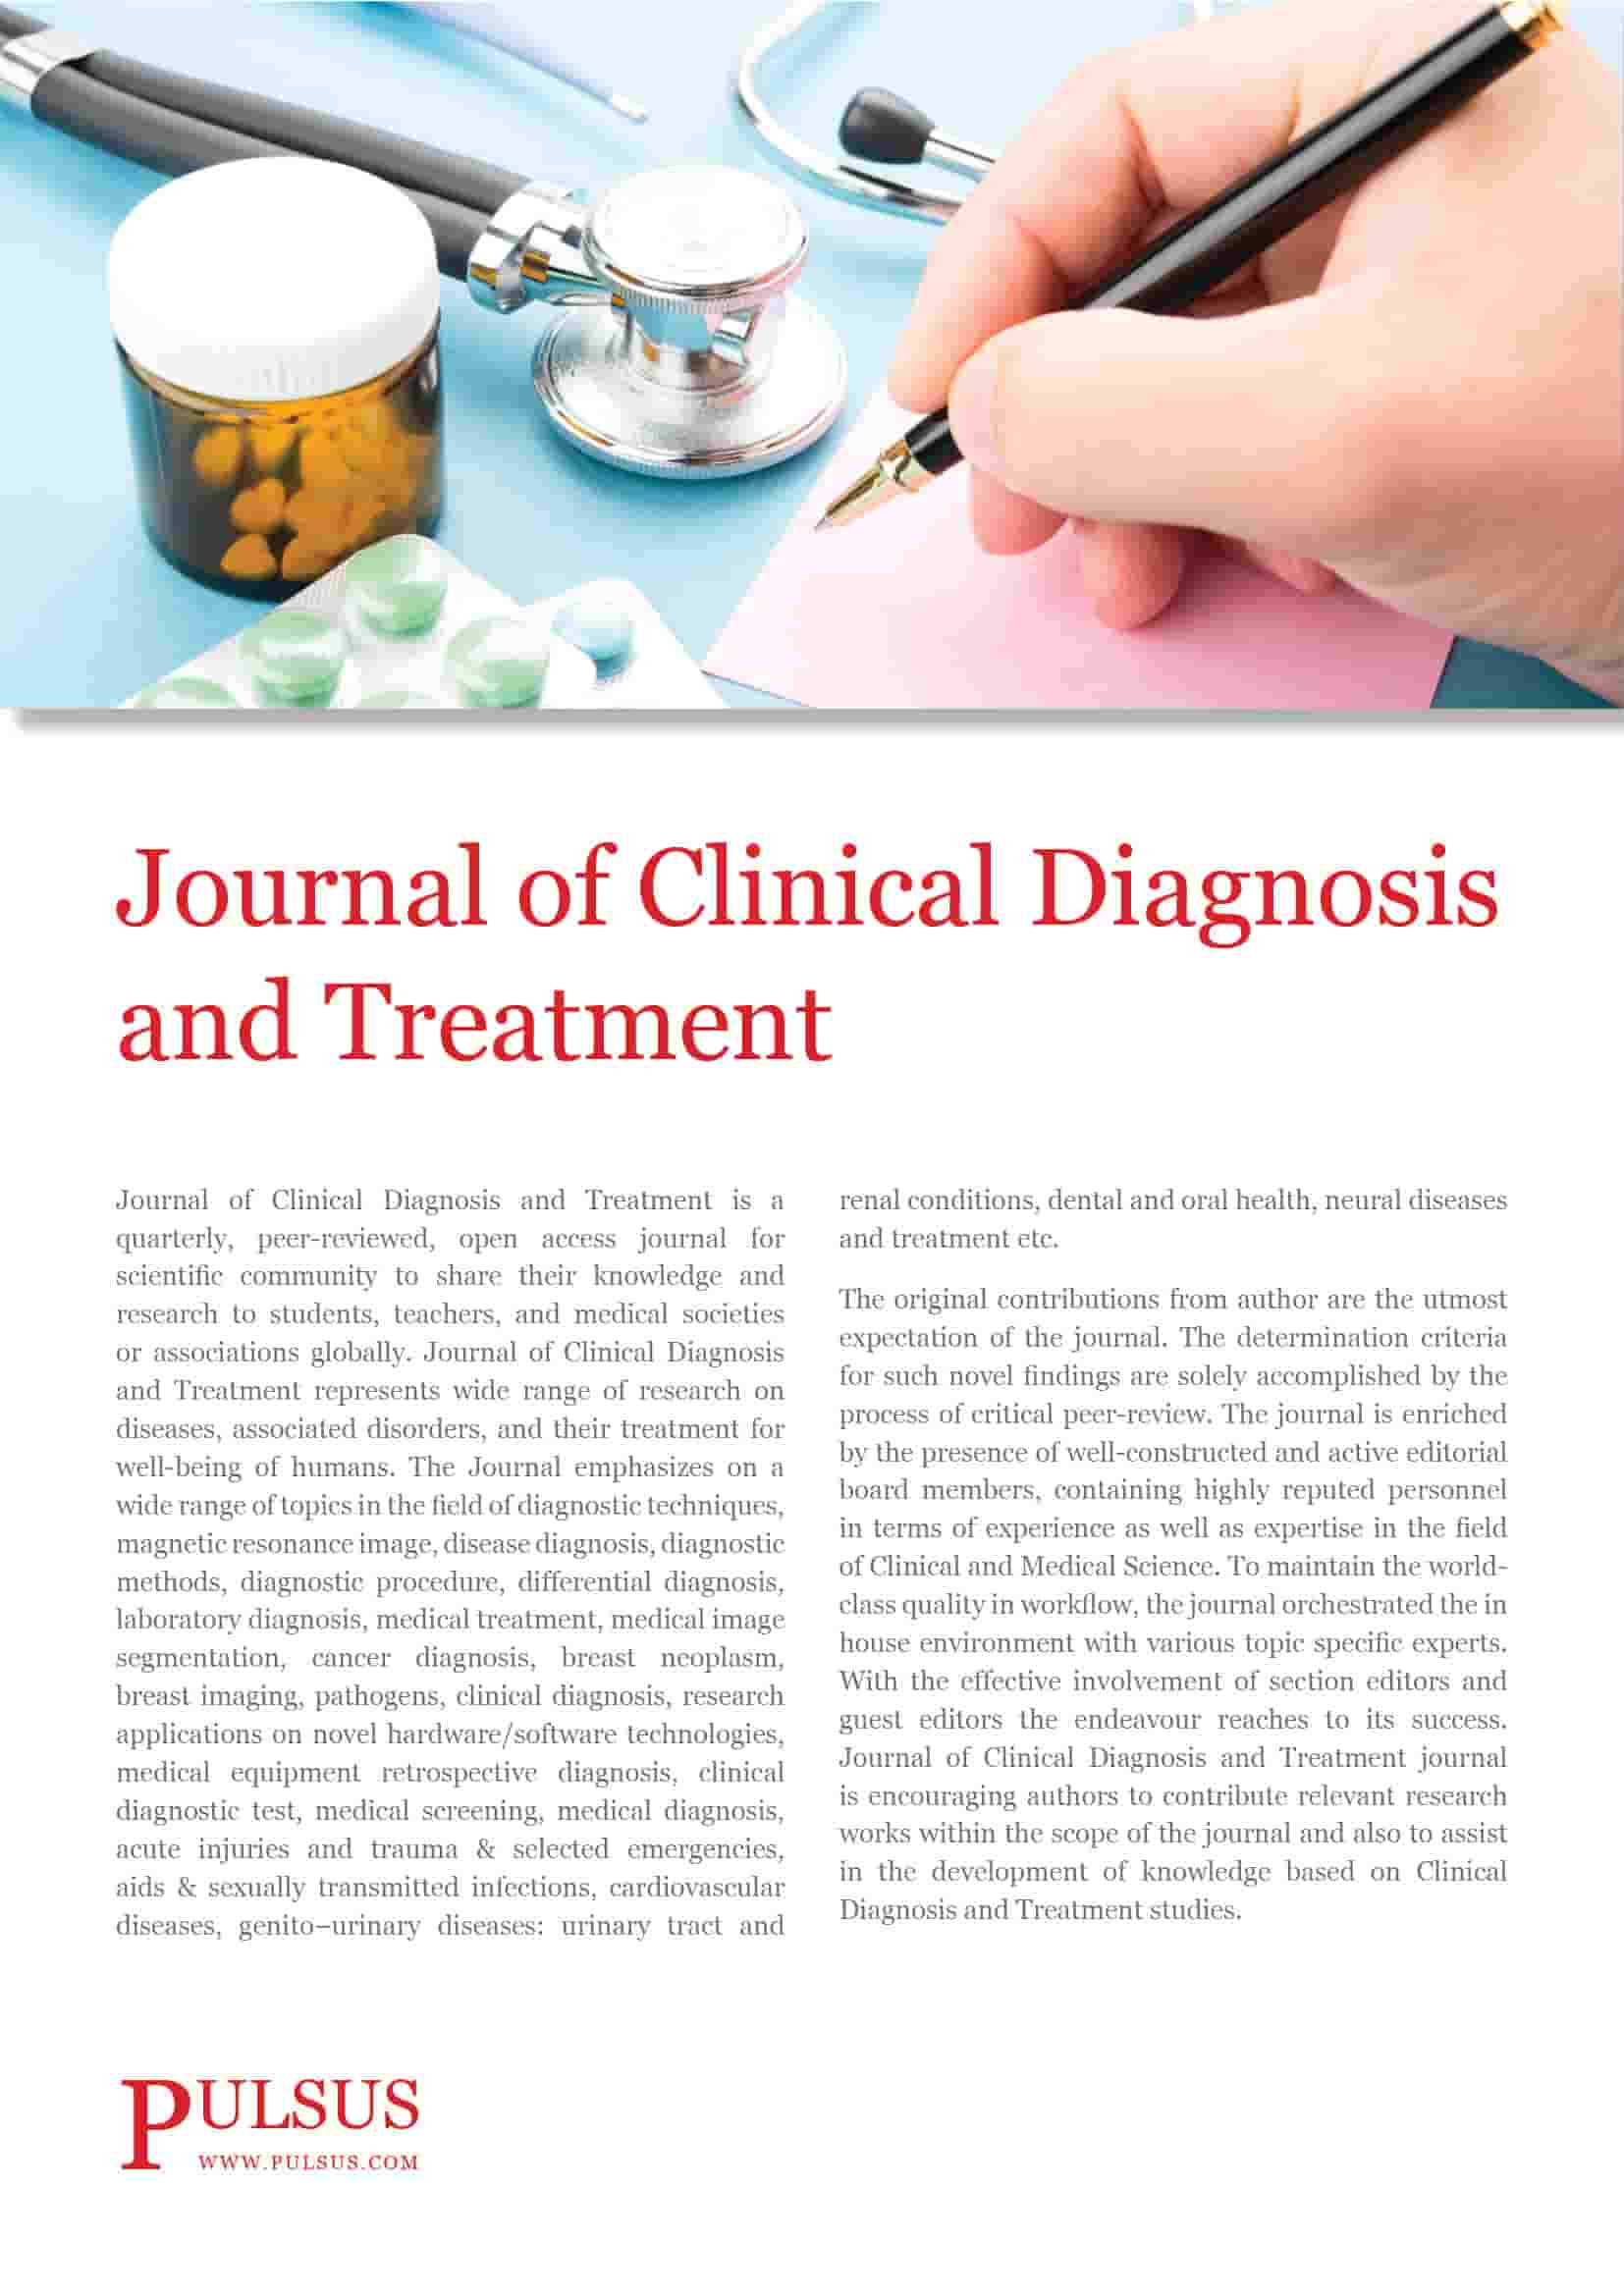 Journal of clinical diagnosis and treatment